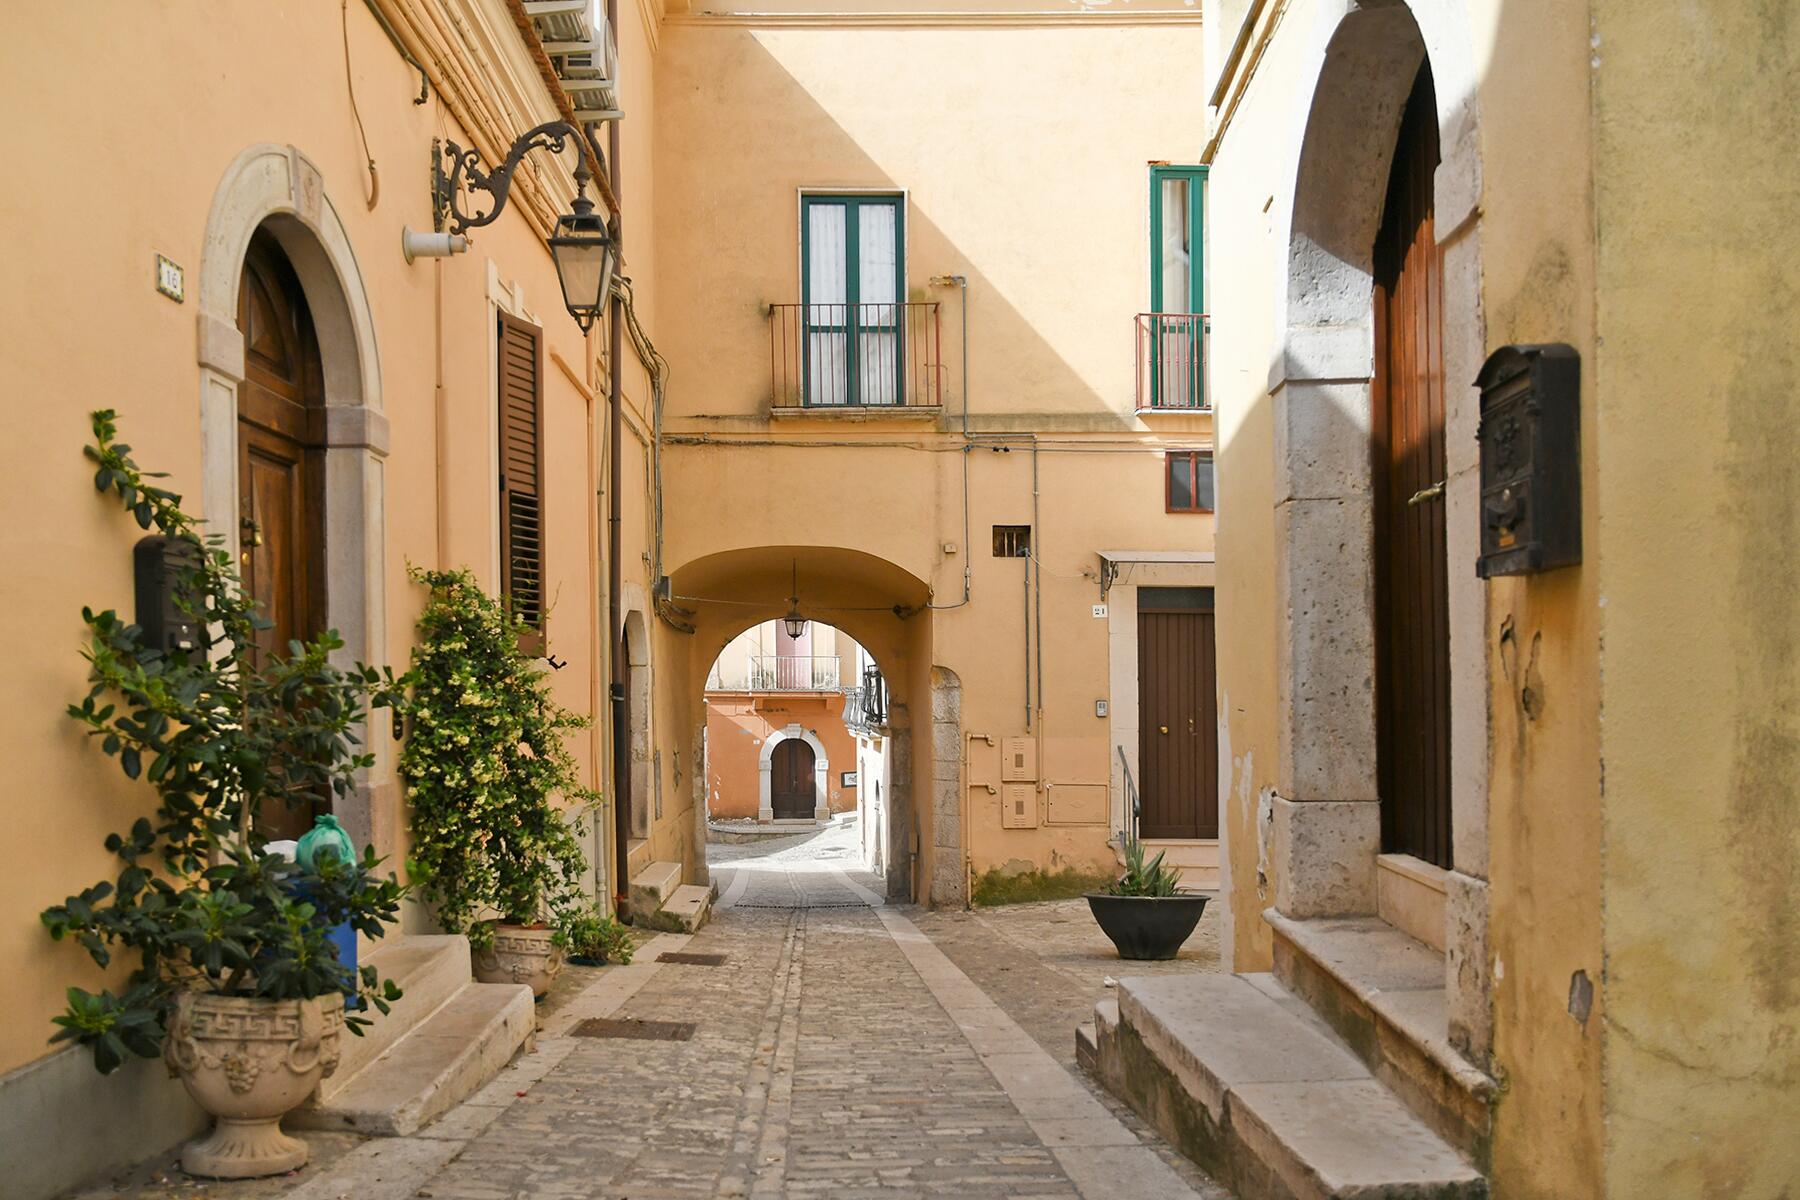 <a href='https://www.fodors.com/world/europe/italy/experiences/news/photos/popular-italian-villages-with-1-euro-houses#'>From &quot;1 Euro Houses Have Turned These 10 Italian Villages Into Popular Hotspots: Candela&quot;</a>